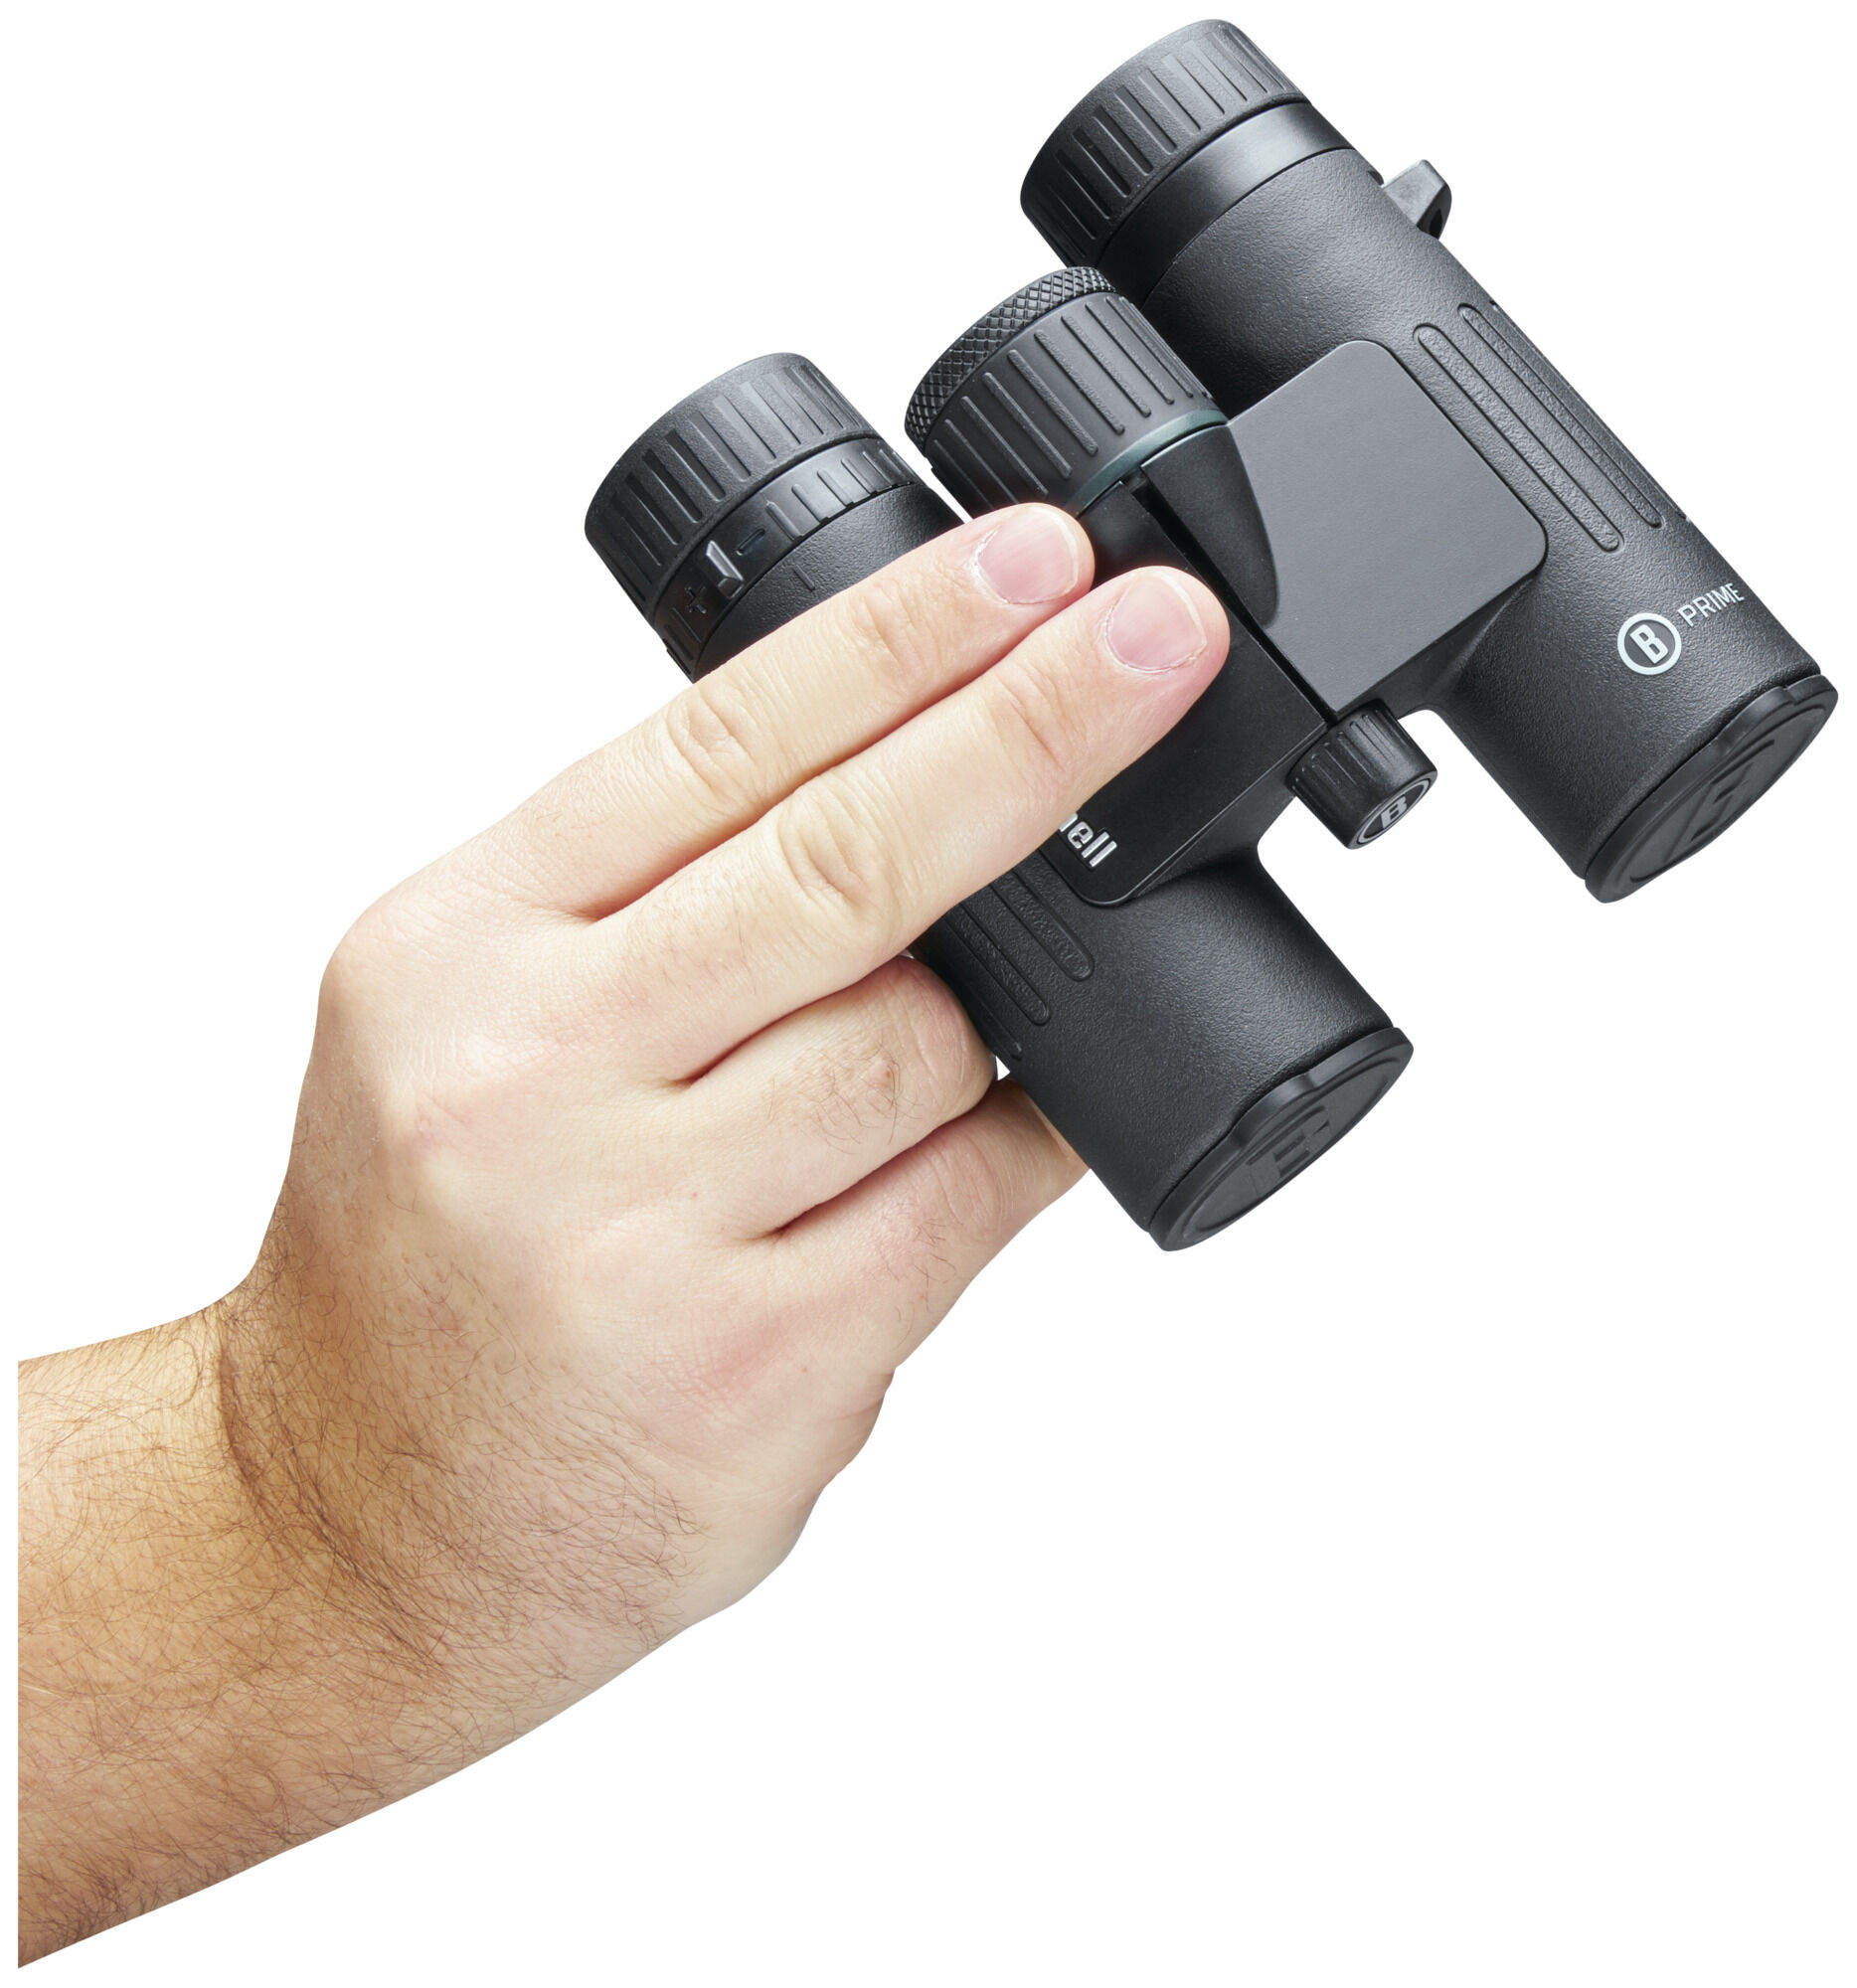 Prime Compact, Hunting Binoculars 10x28 Magnification | Bushnell